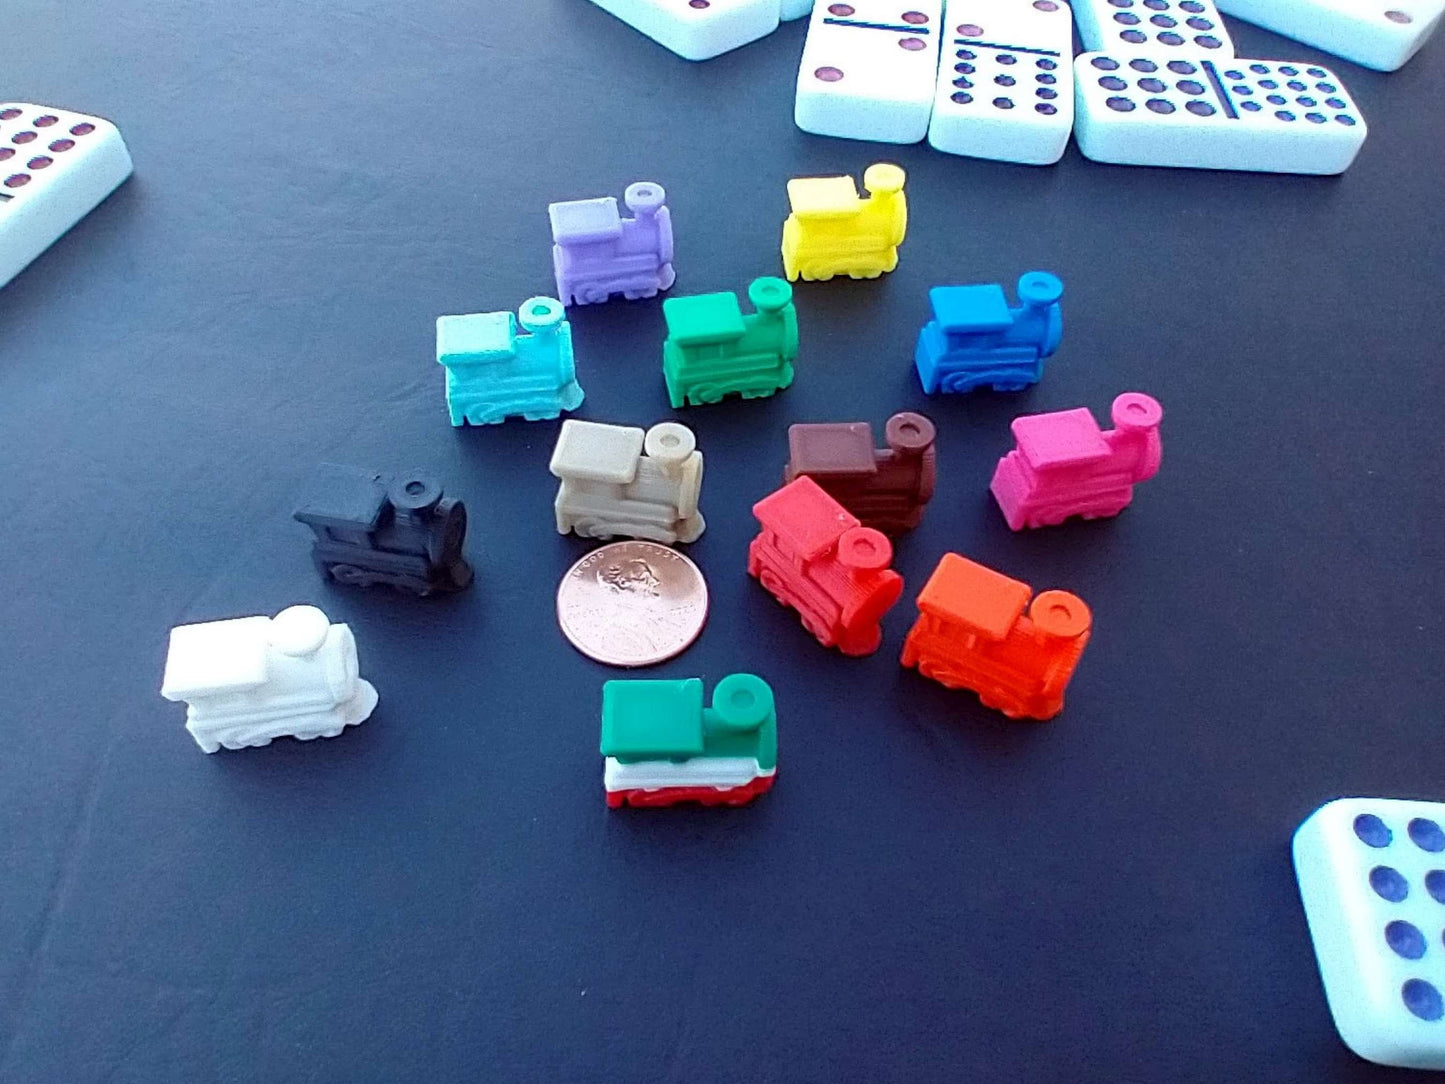 13 Colored Trains for Mexican Train Dominos